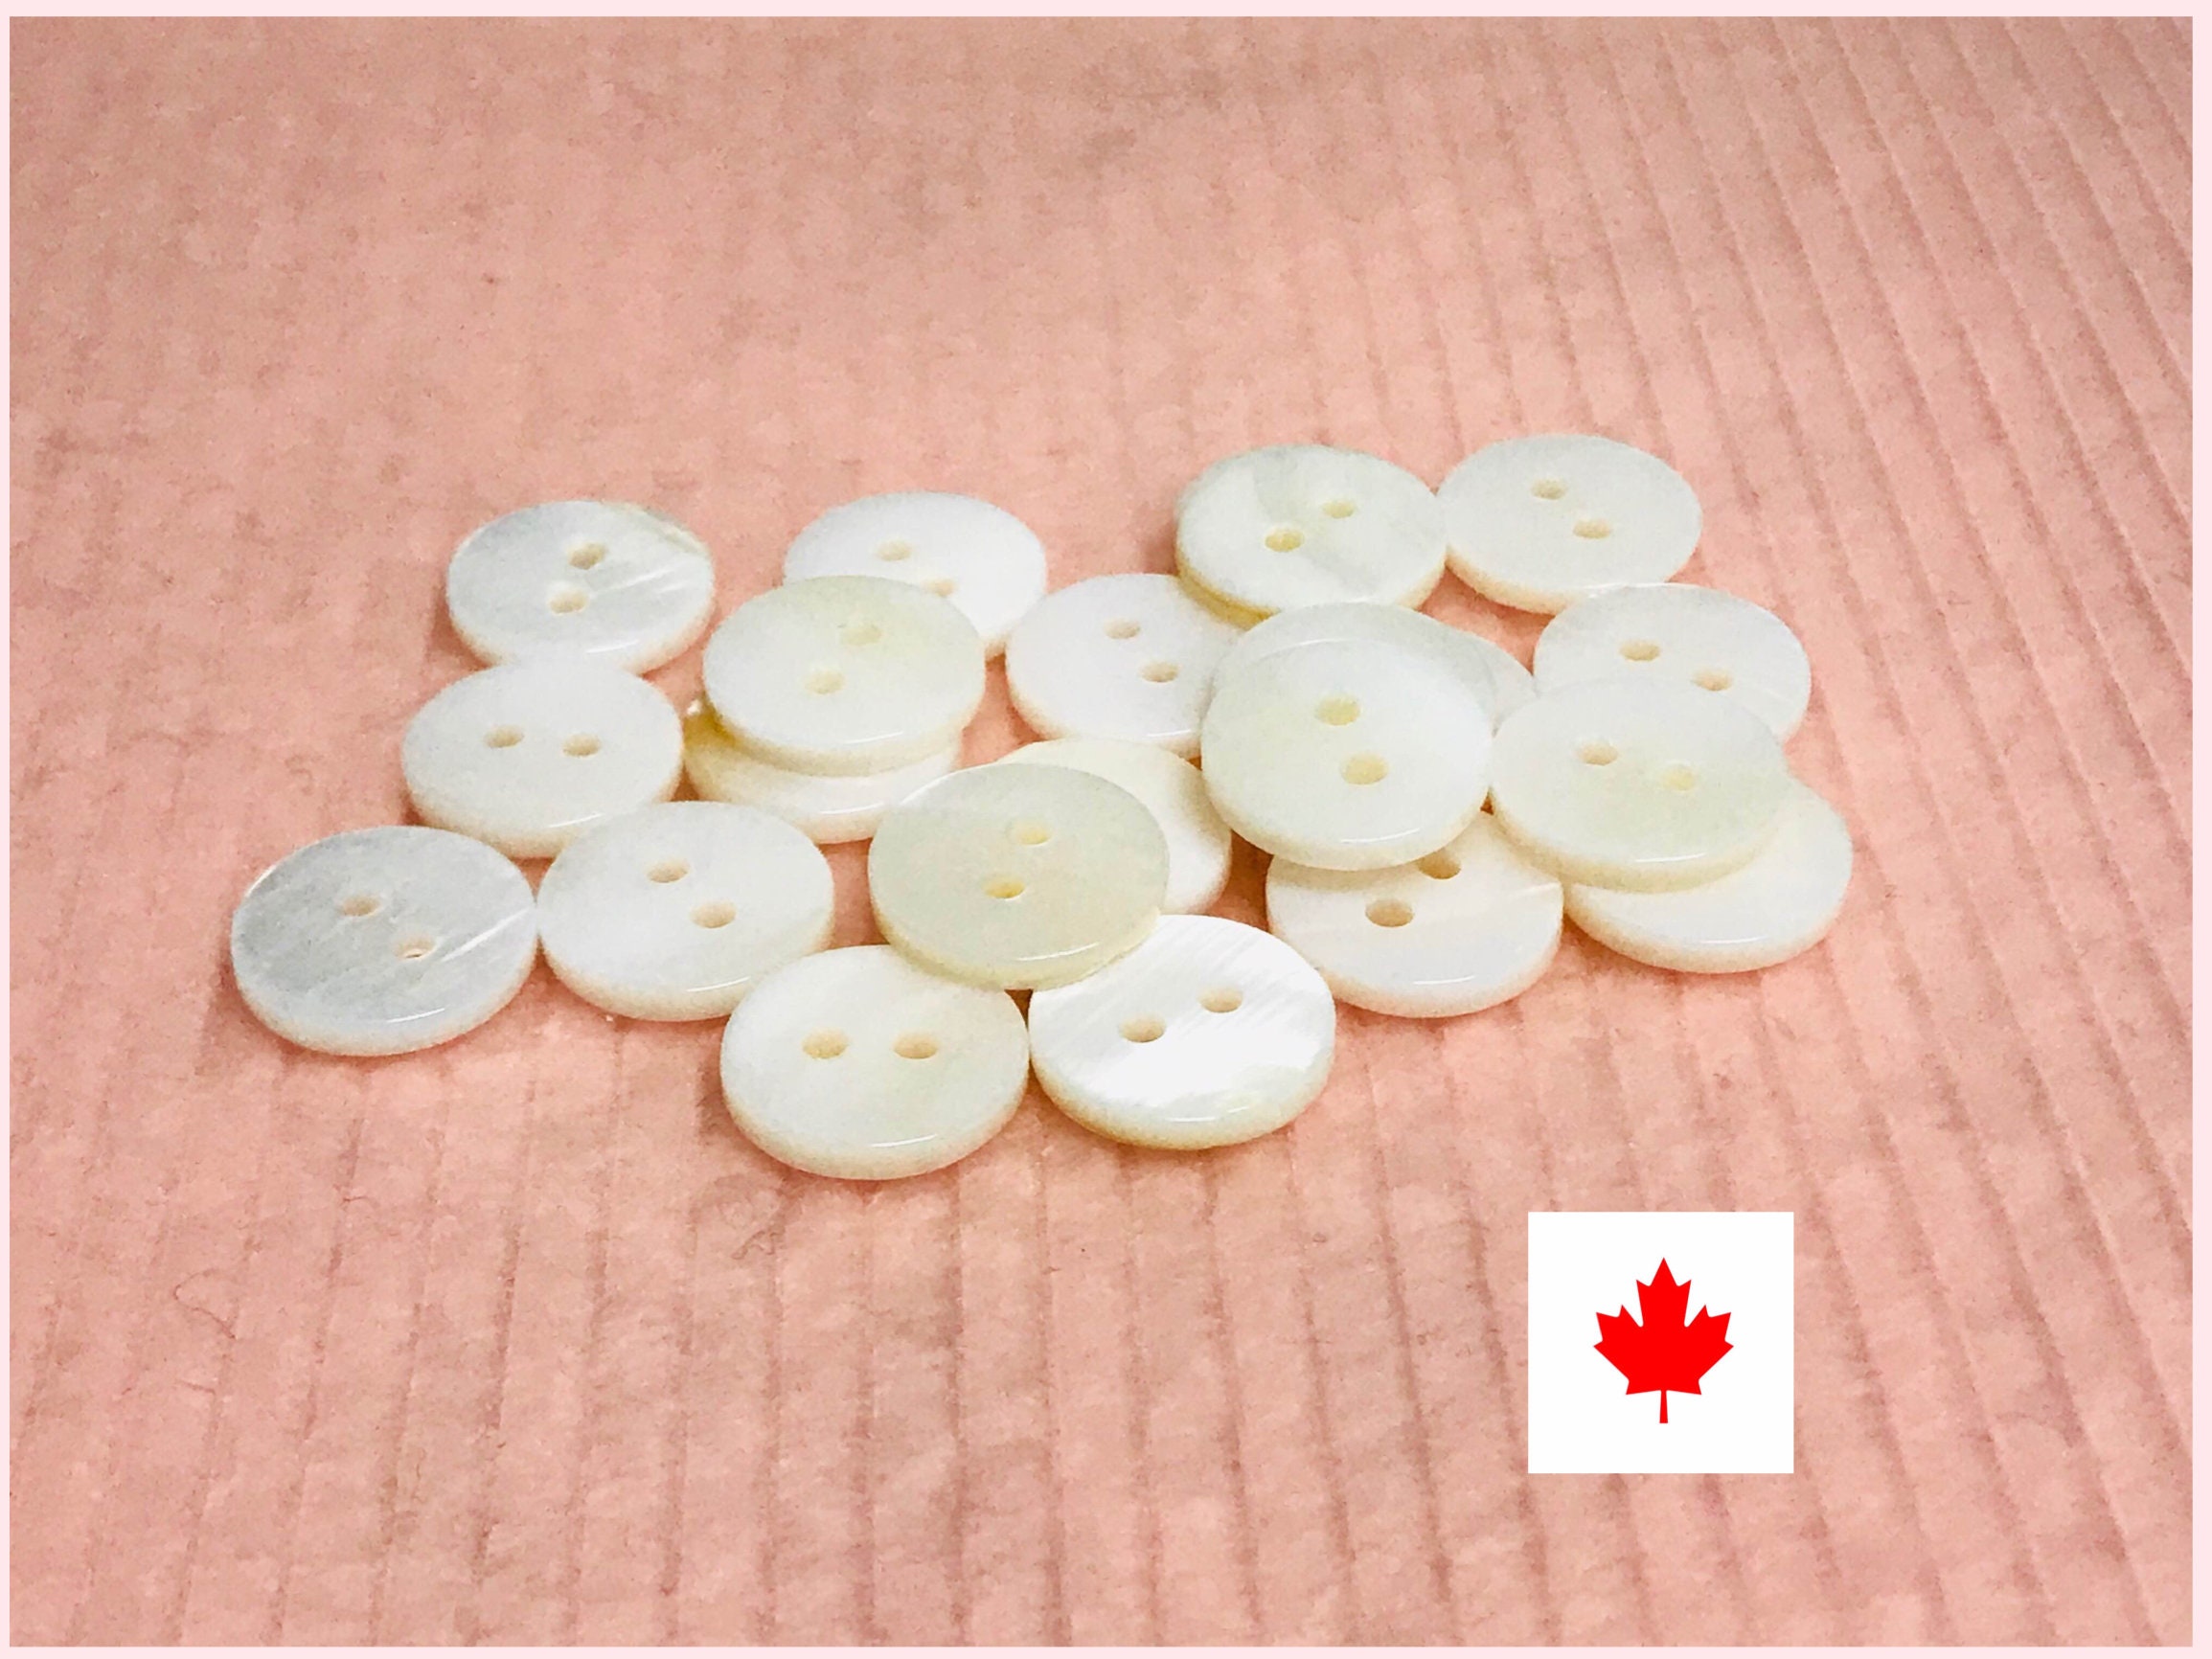 Dophee 100pcs Plastic White Buttons 4 Holes Clear Clothing Shirt Sewing Buttons - 11.5mm